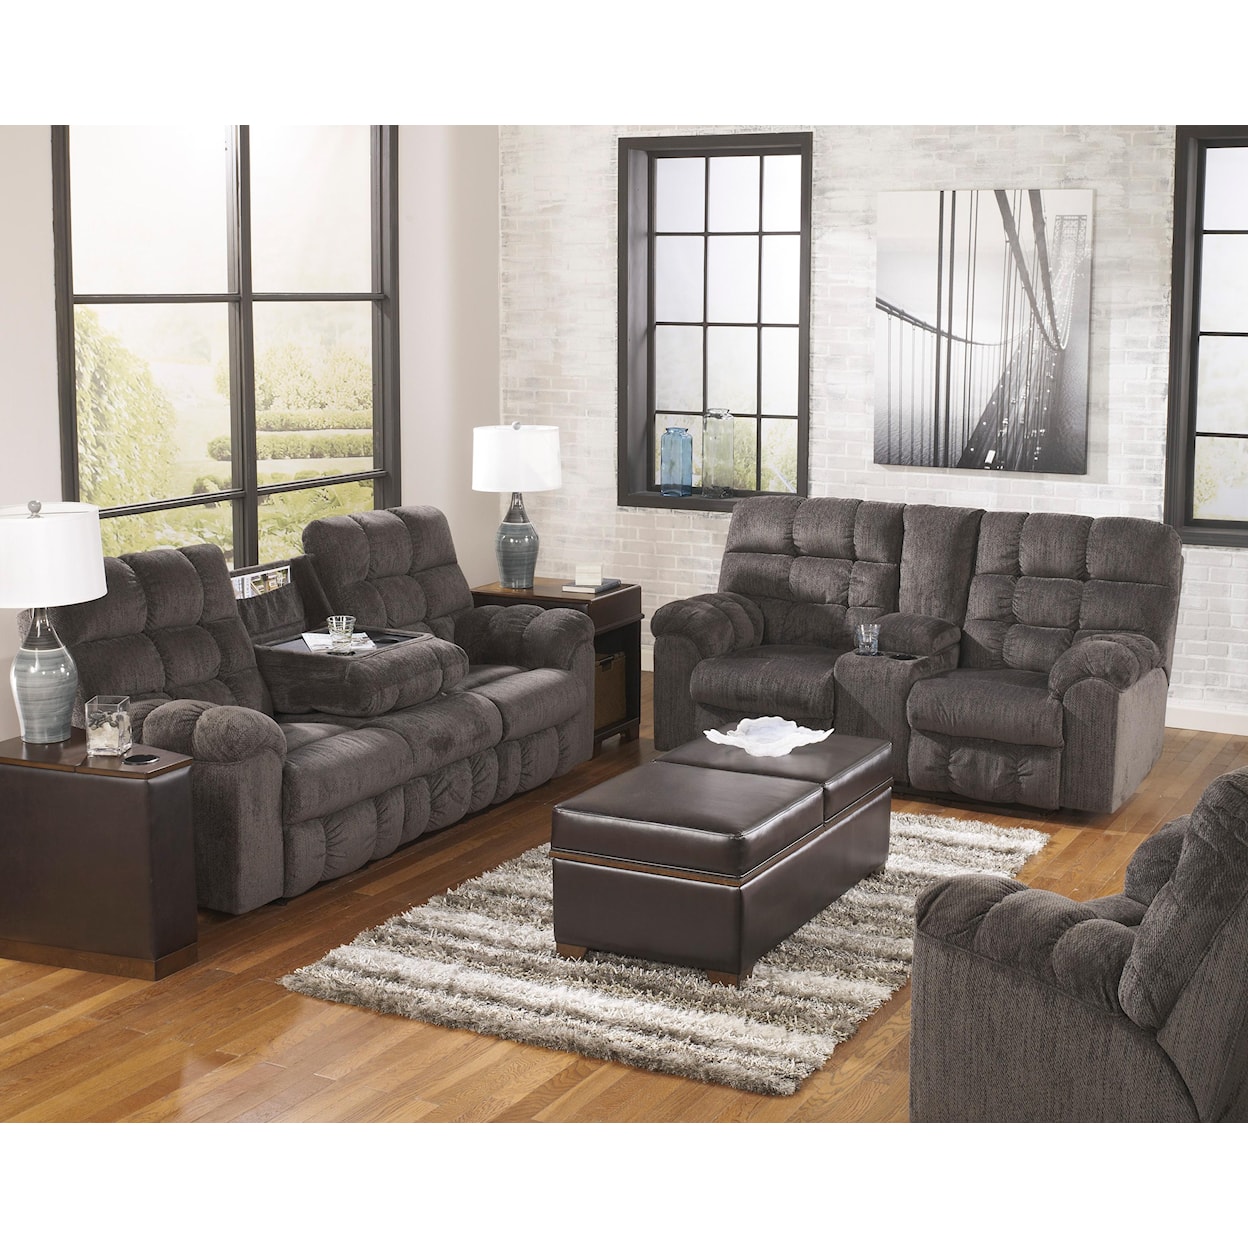 Signature Design by Ashley Acieona Reclining Living Room Group